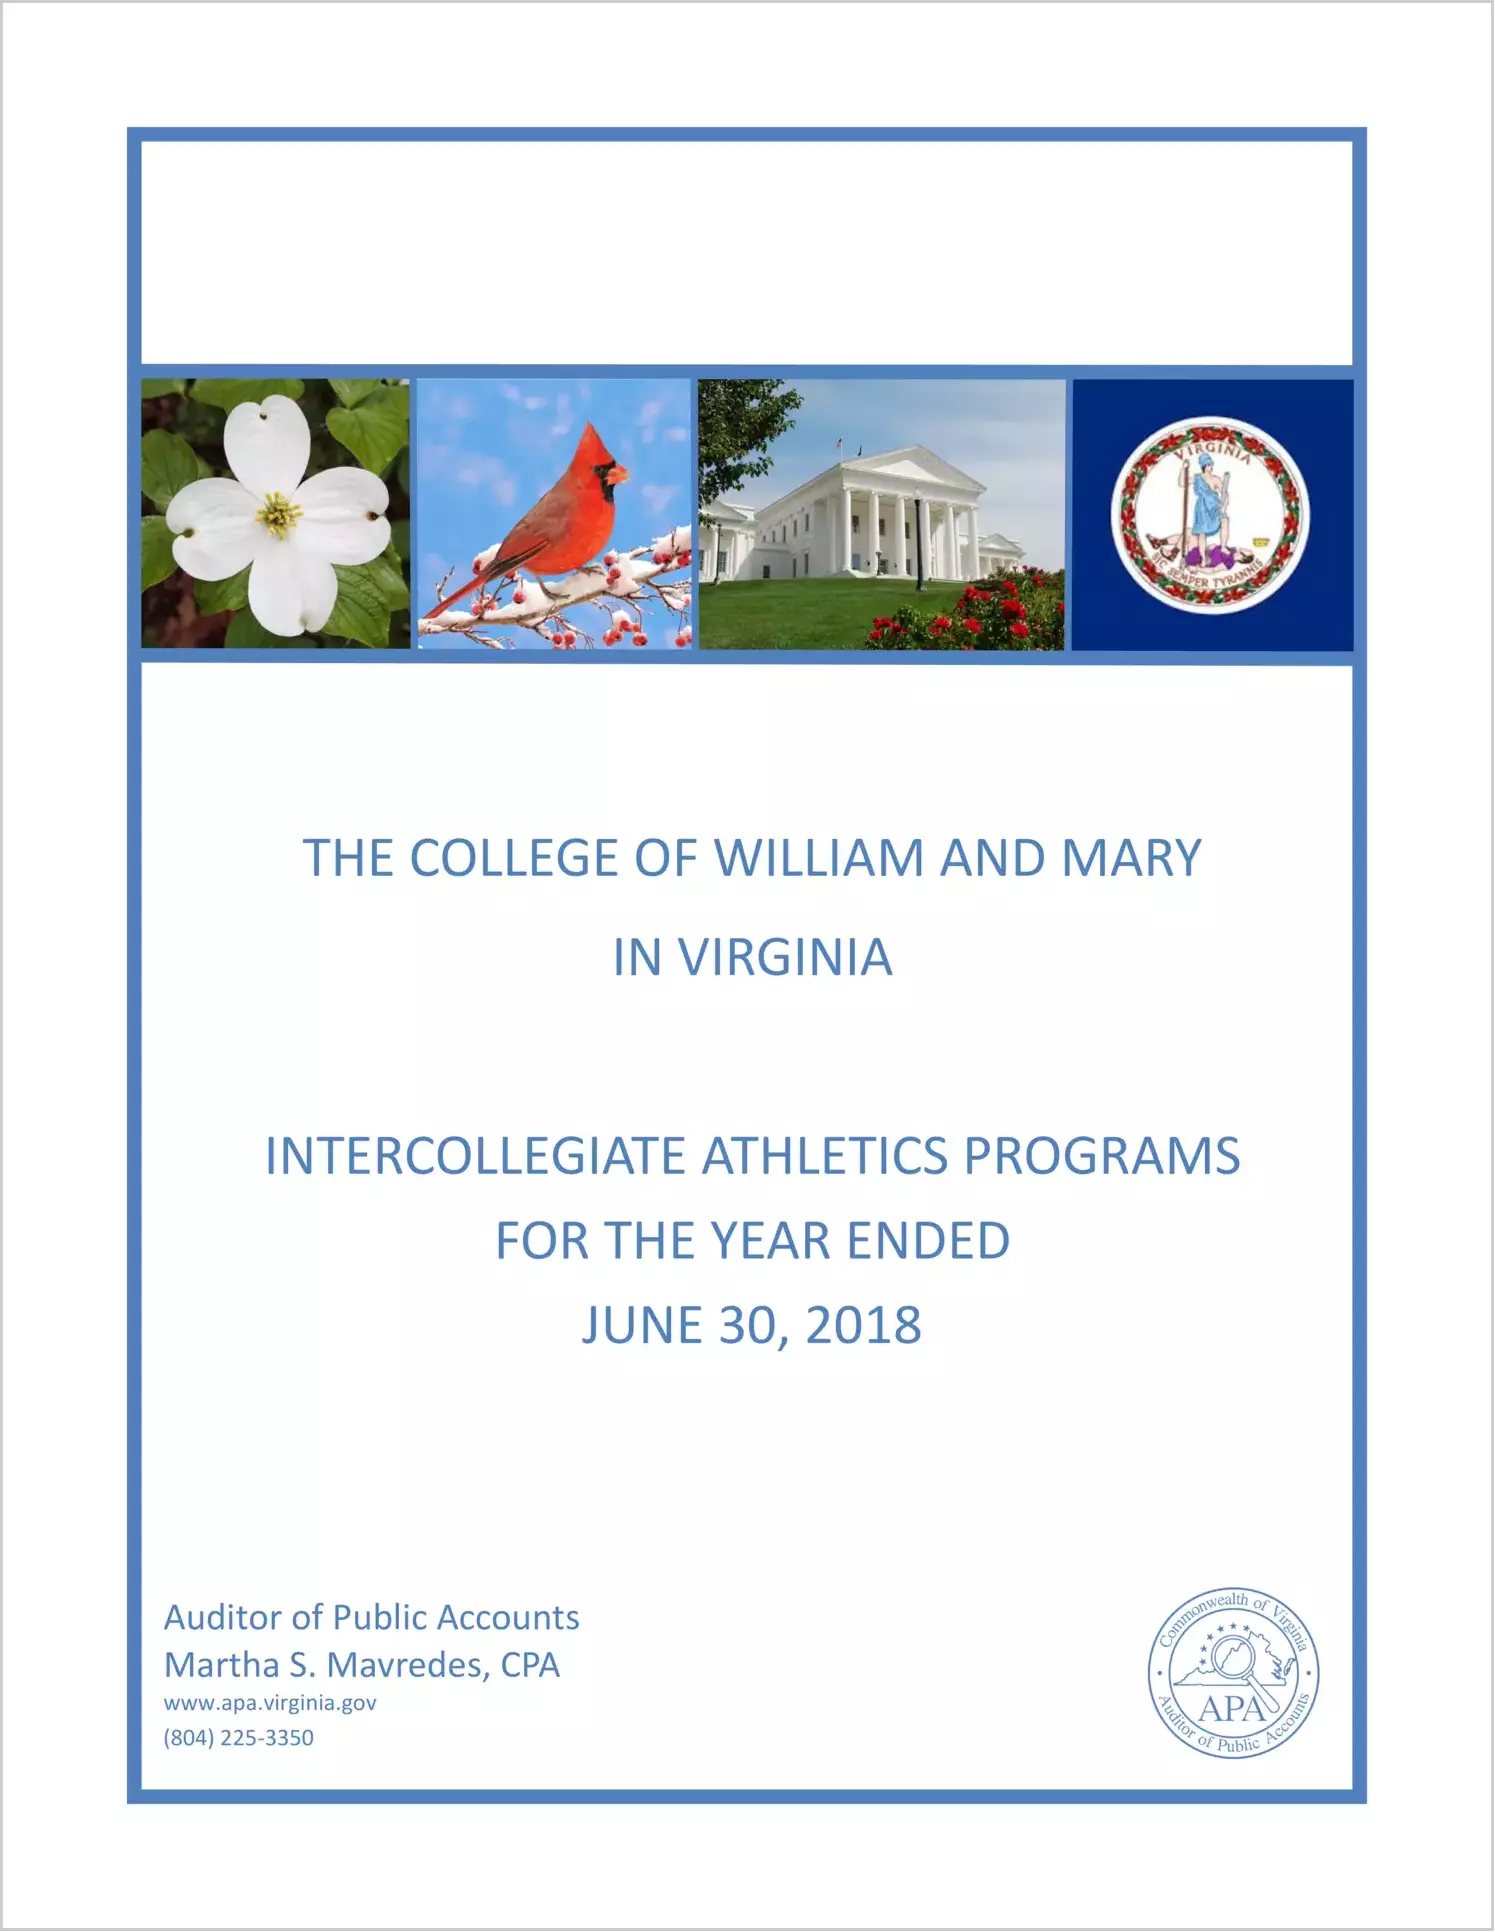 College of William and Mary Intercollegiate Athletics Programs for the year ended June 30, 2018